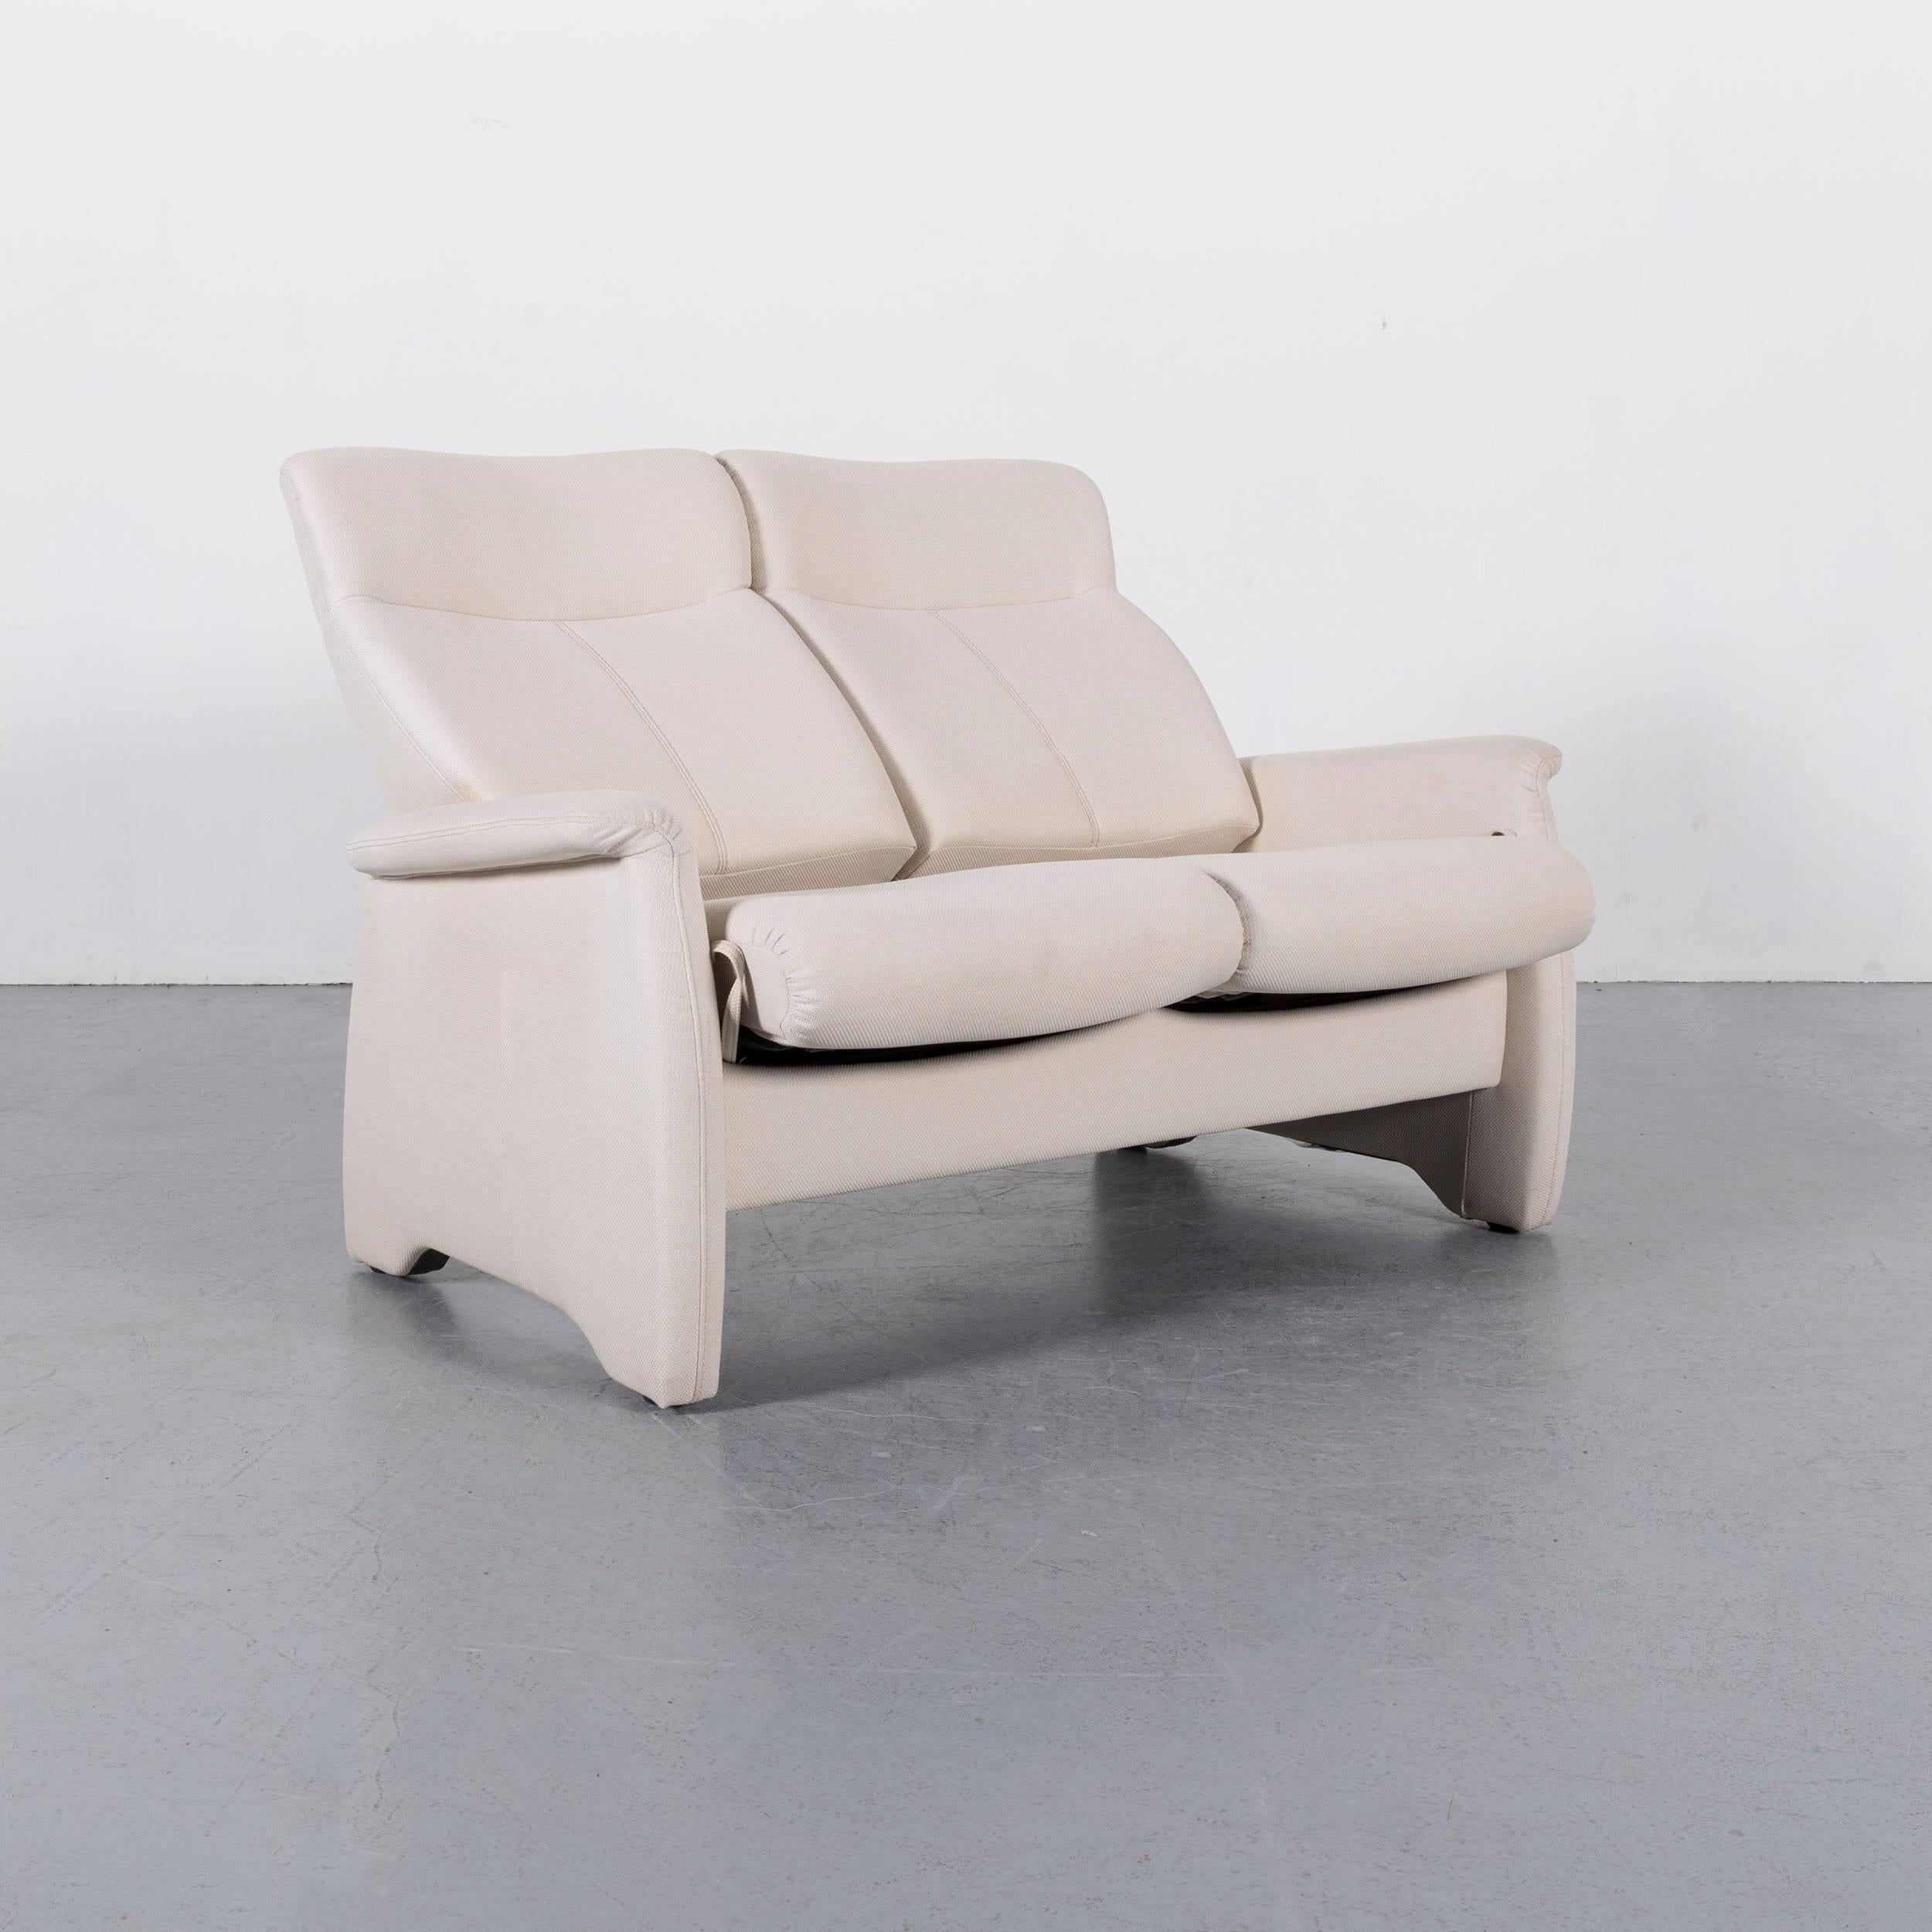 German Himolla Fabric Sofa Off-White Two-Seat Couch Recliner For Sale